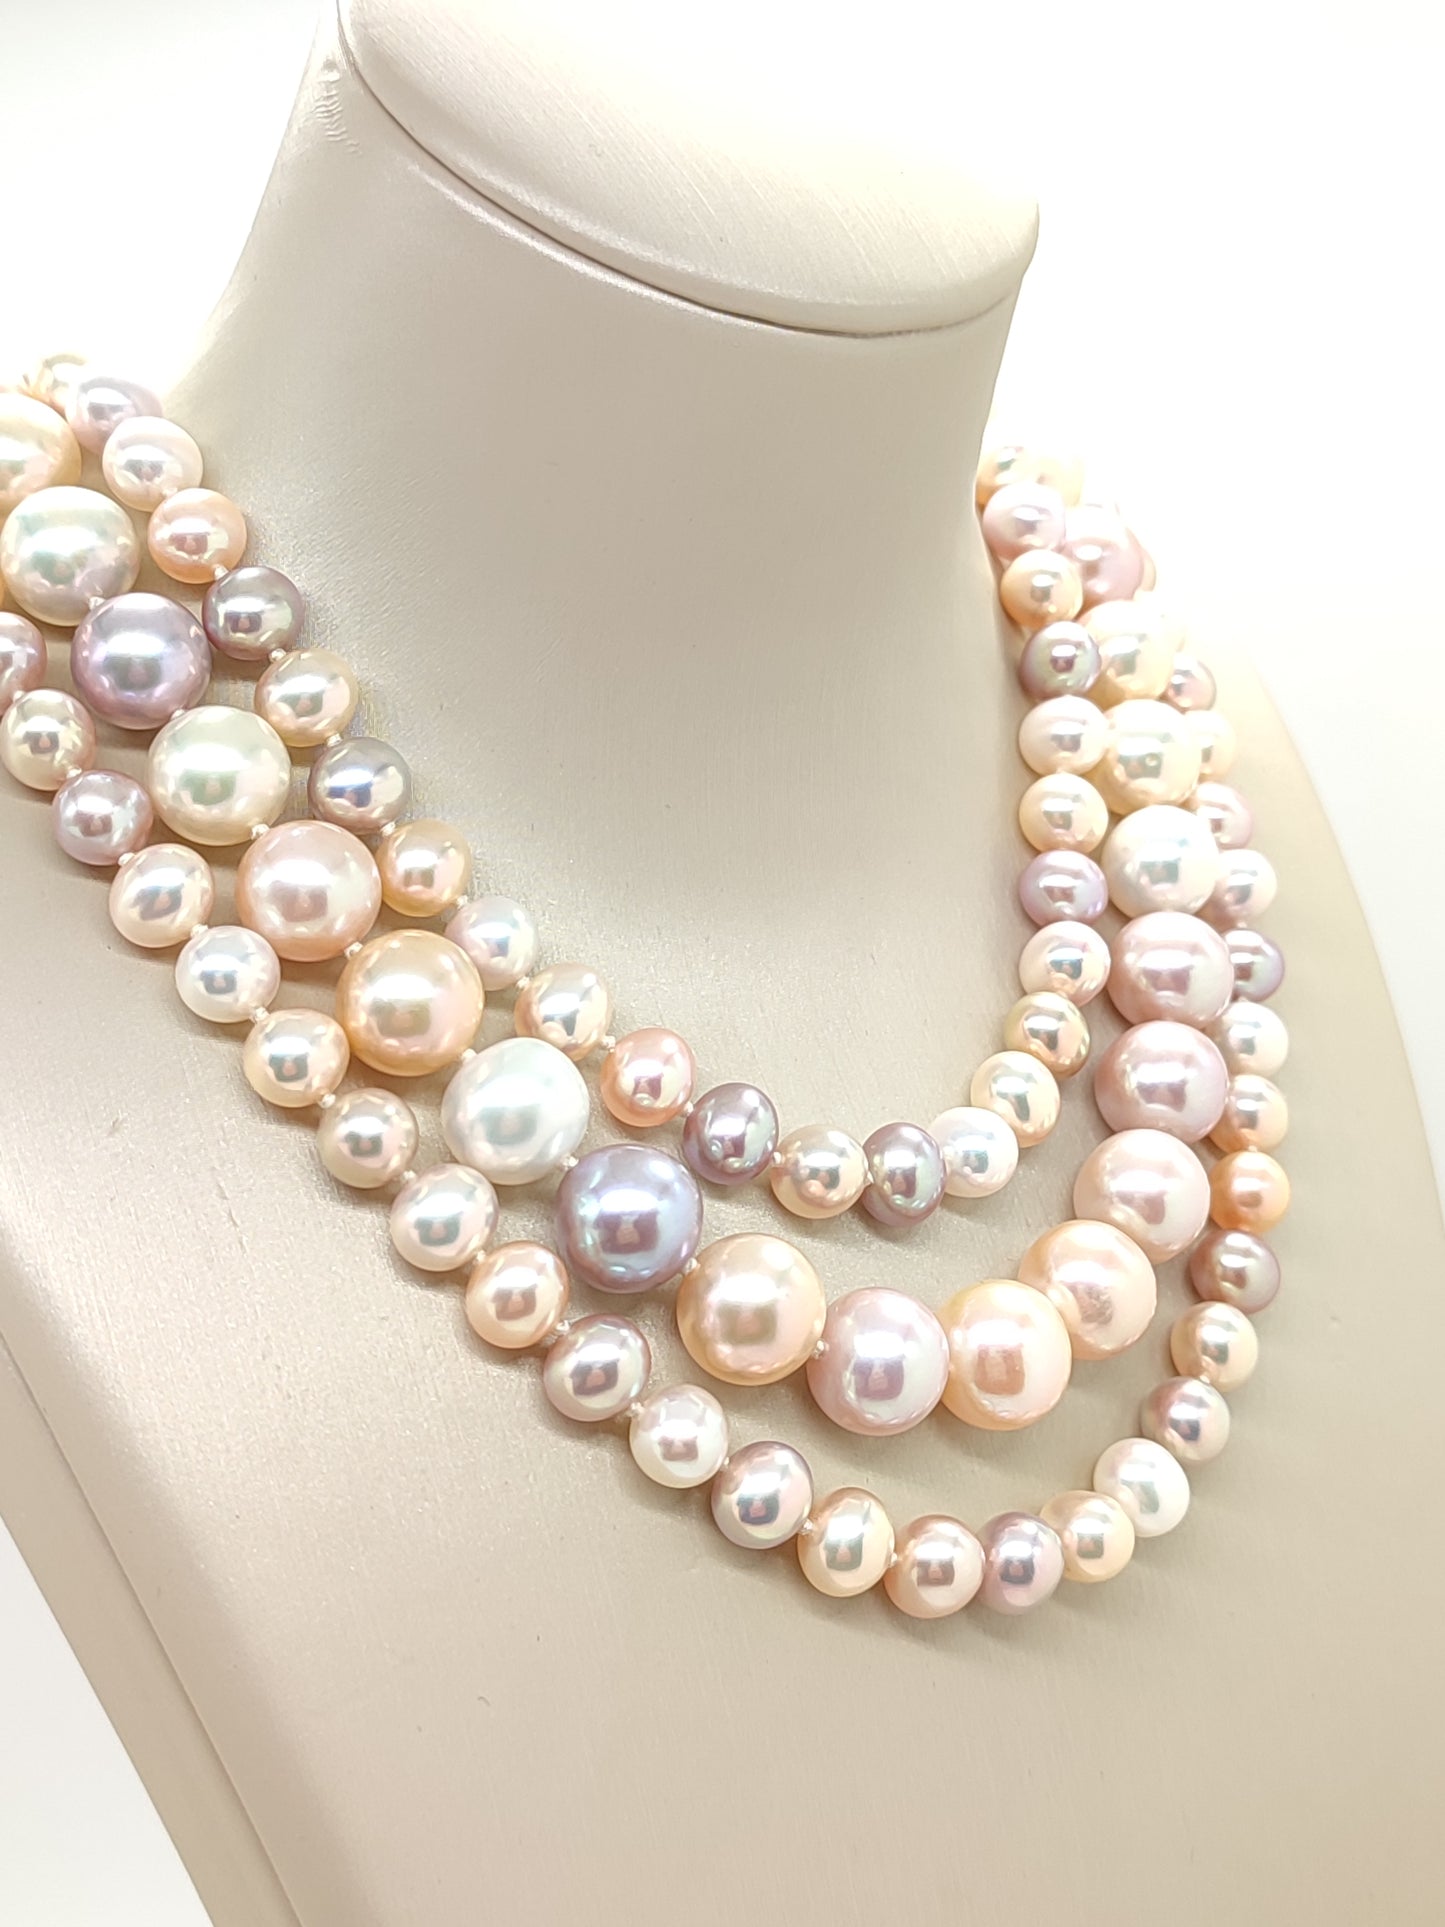 3-strand gold necklace with multicolored layered pearls